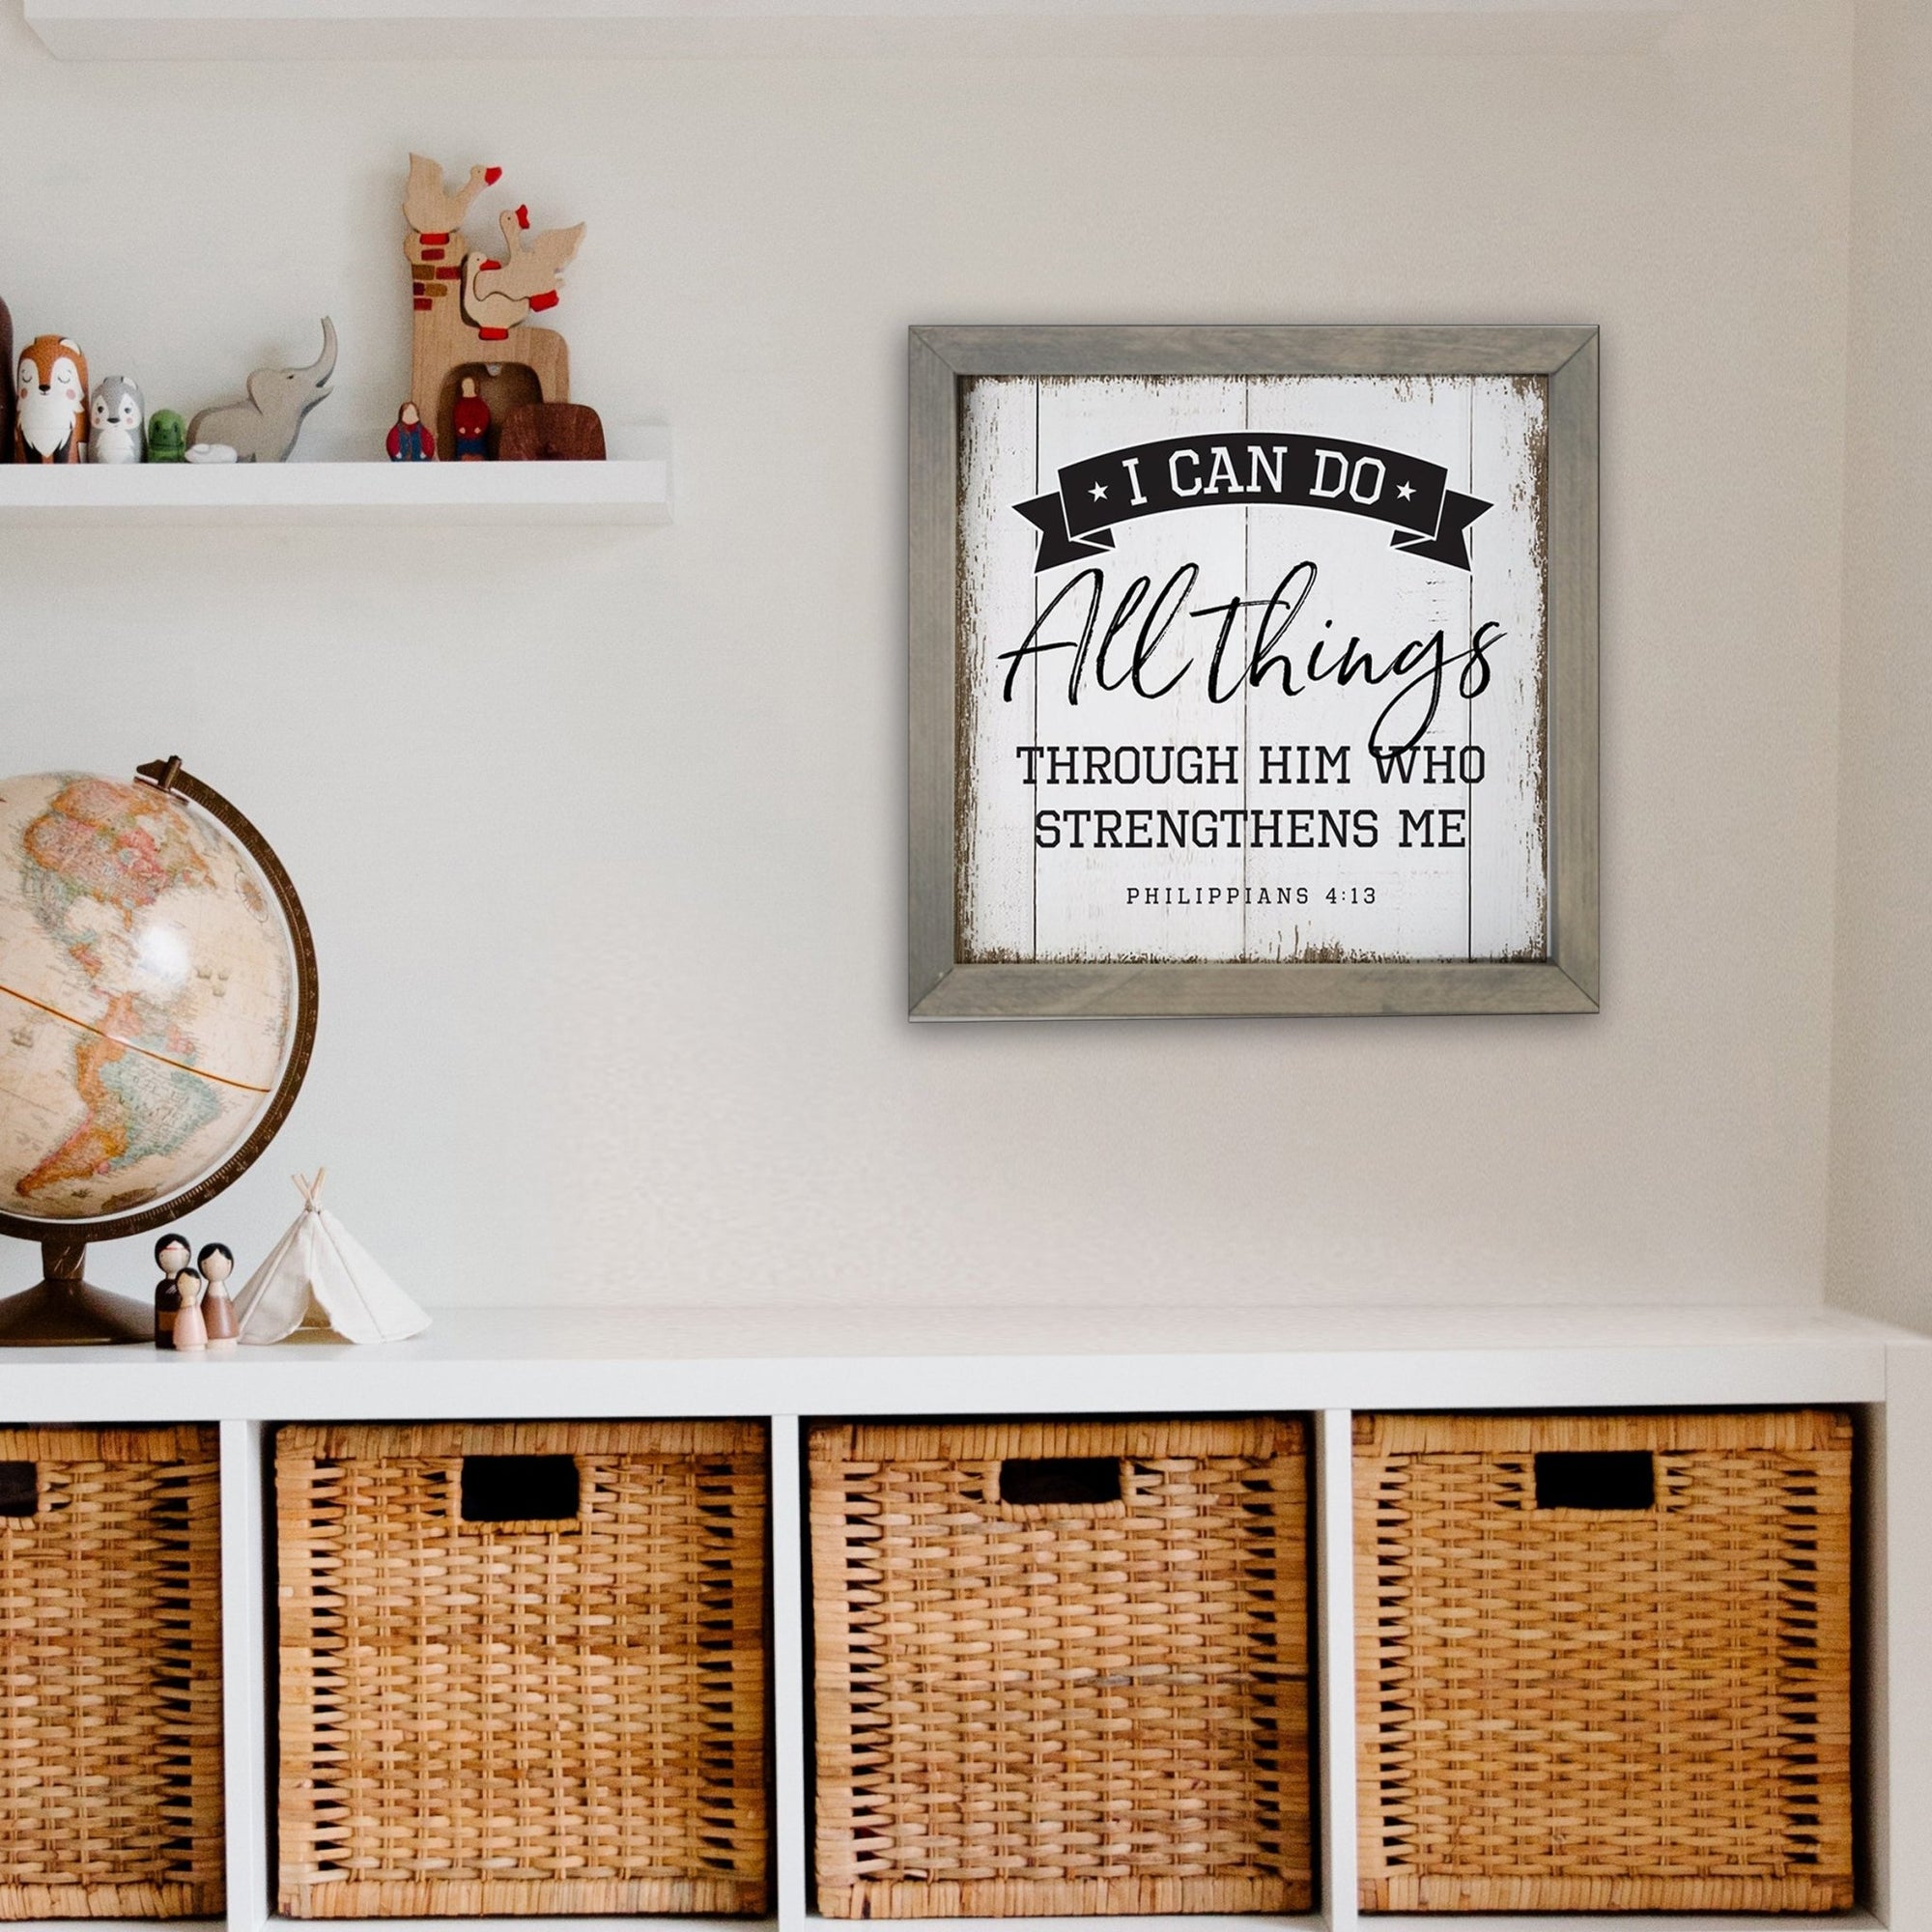 Elegant Baseball Framed Shadow Box Shelf Décor With Inspiring Bible Verses - I Can Do All Things - LifeSong Milestones